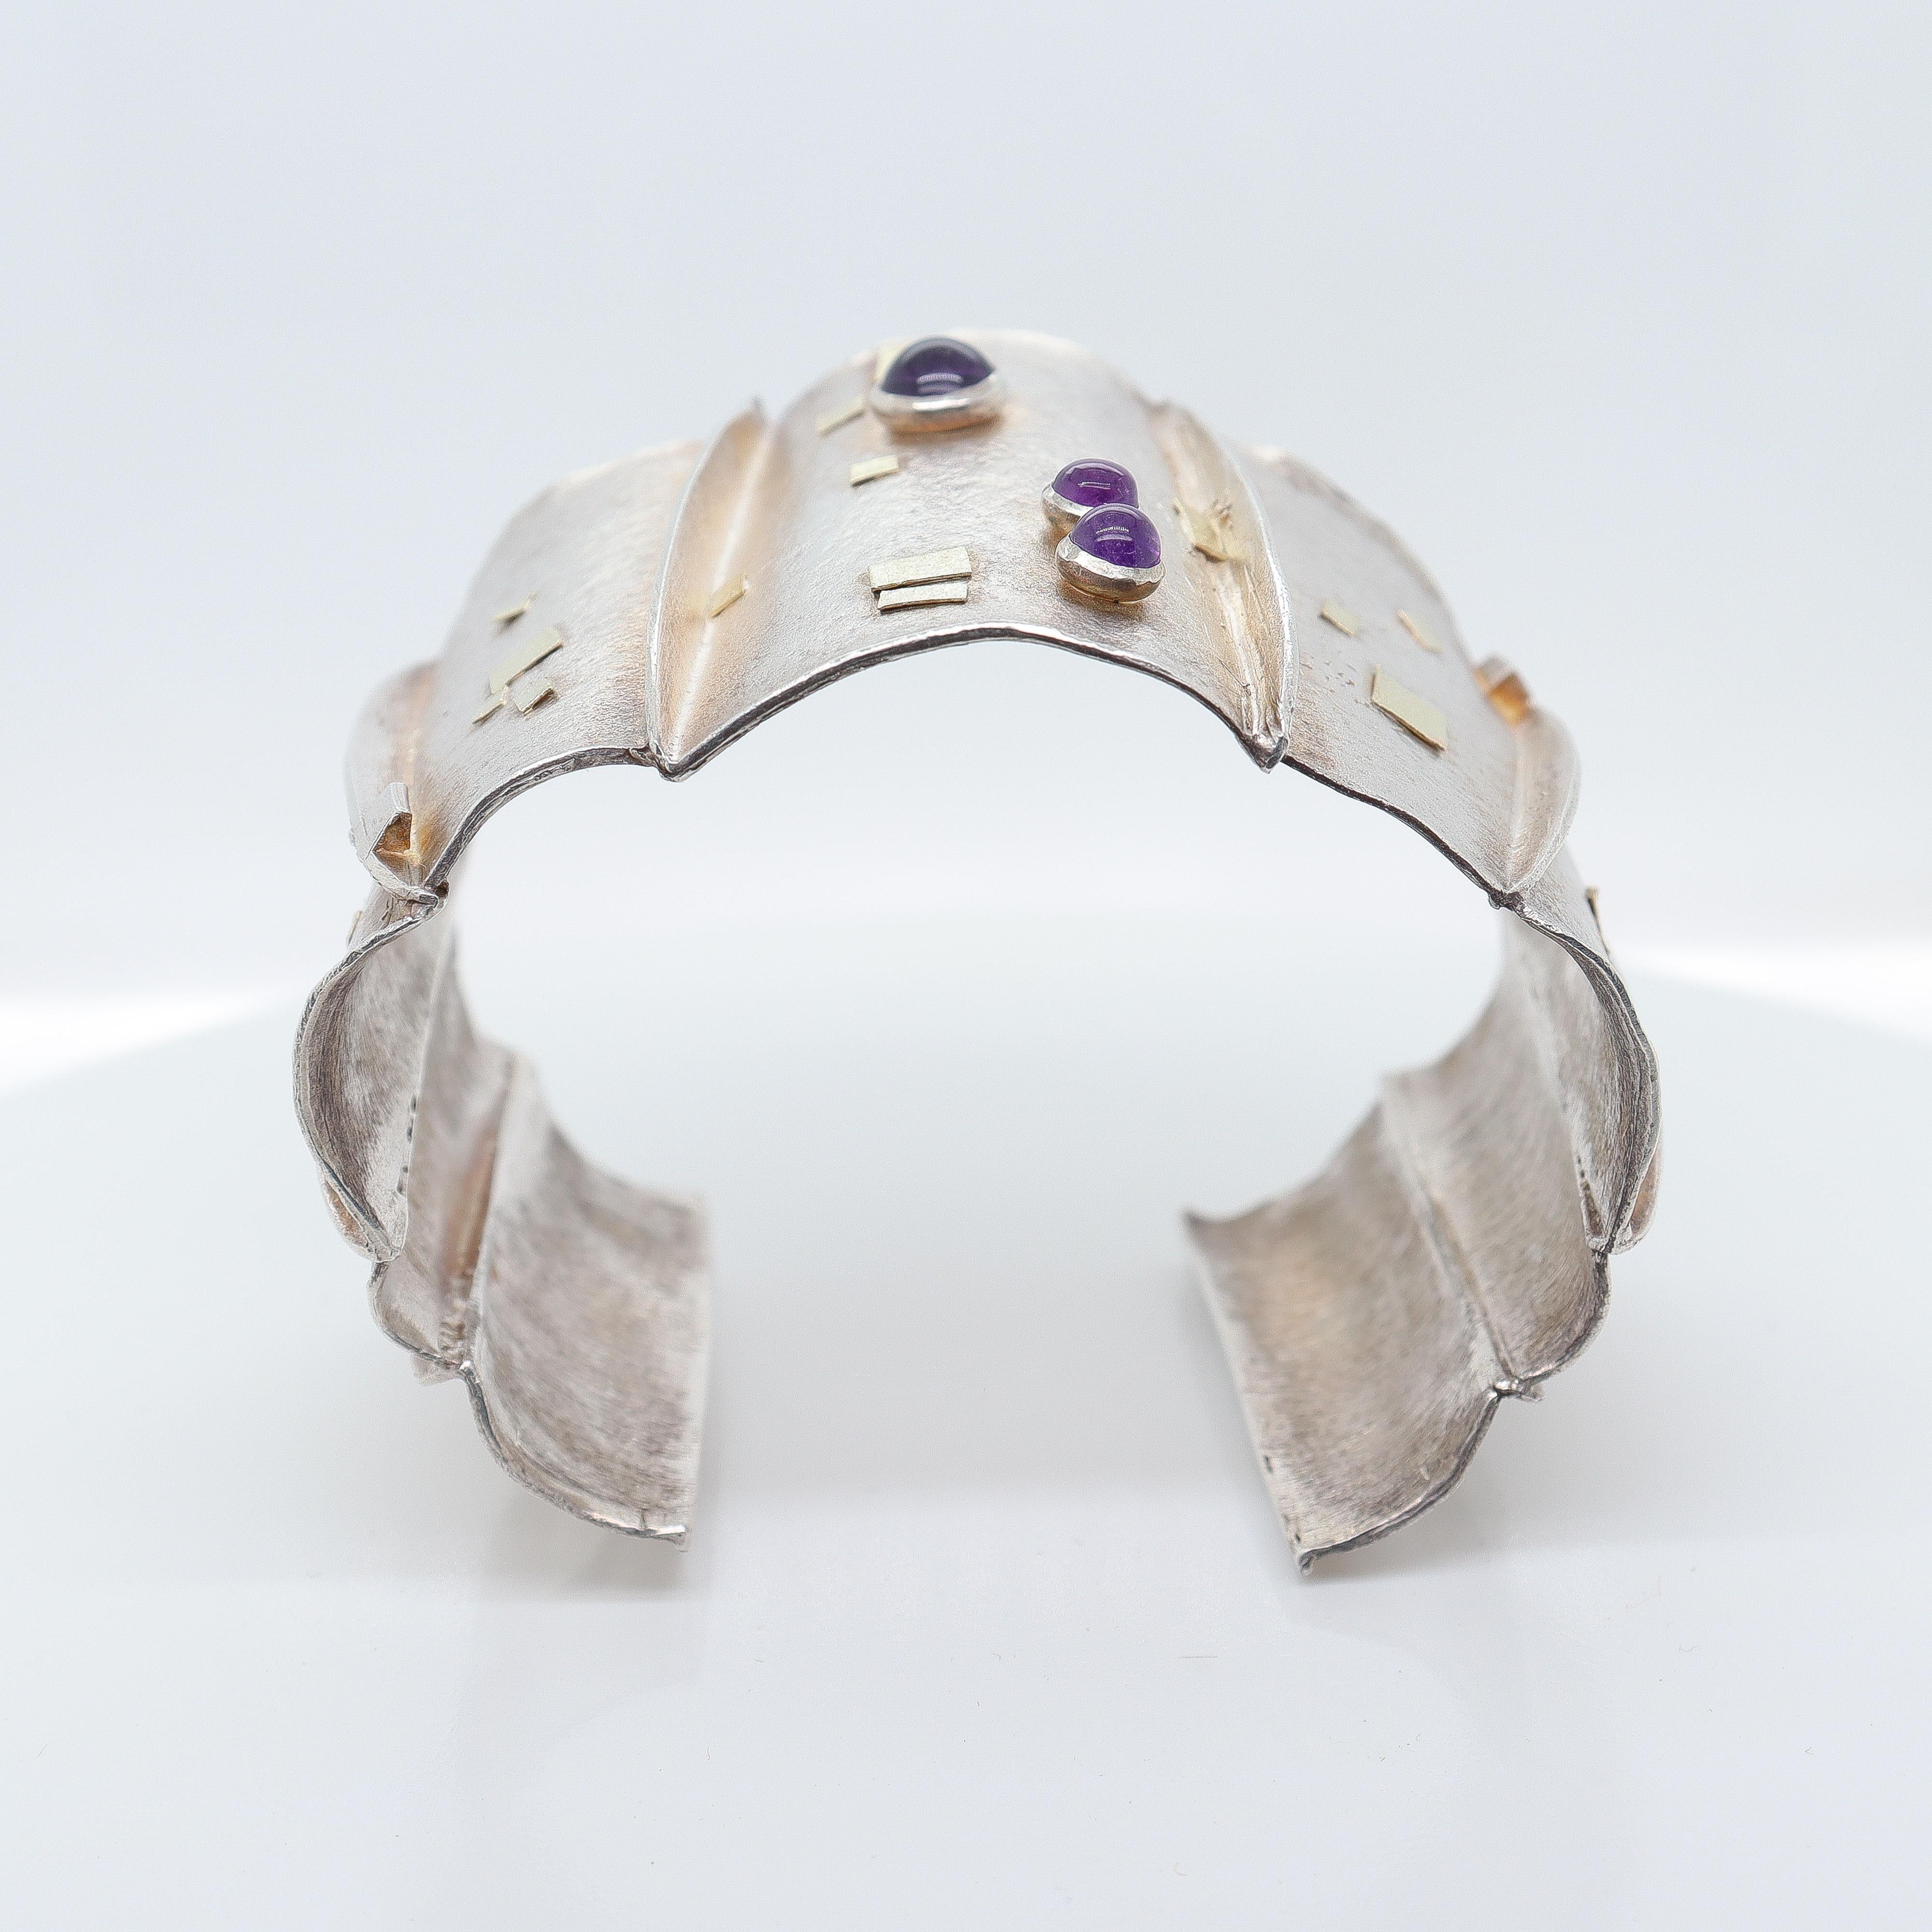 Modernist Silver, Gold, & Amethyst Cuff Bracelet Attributed to Enid Kaplan For Sale 2